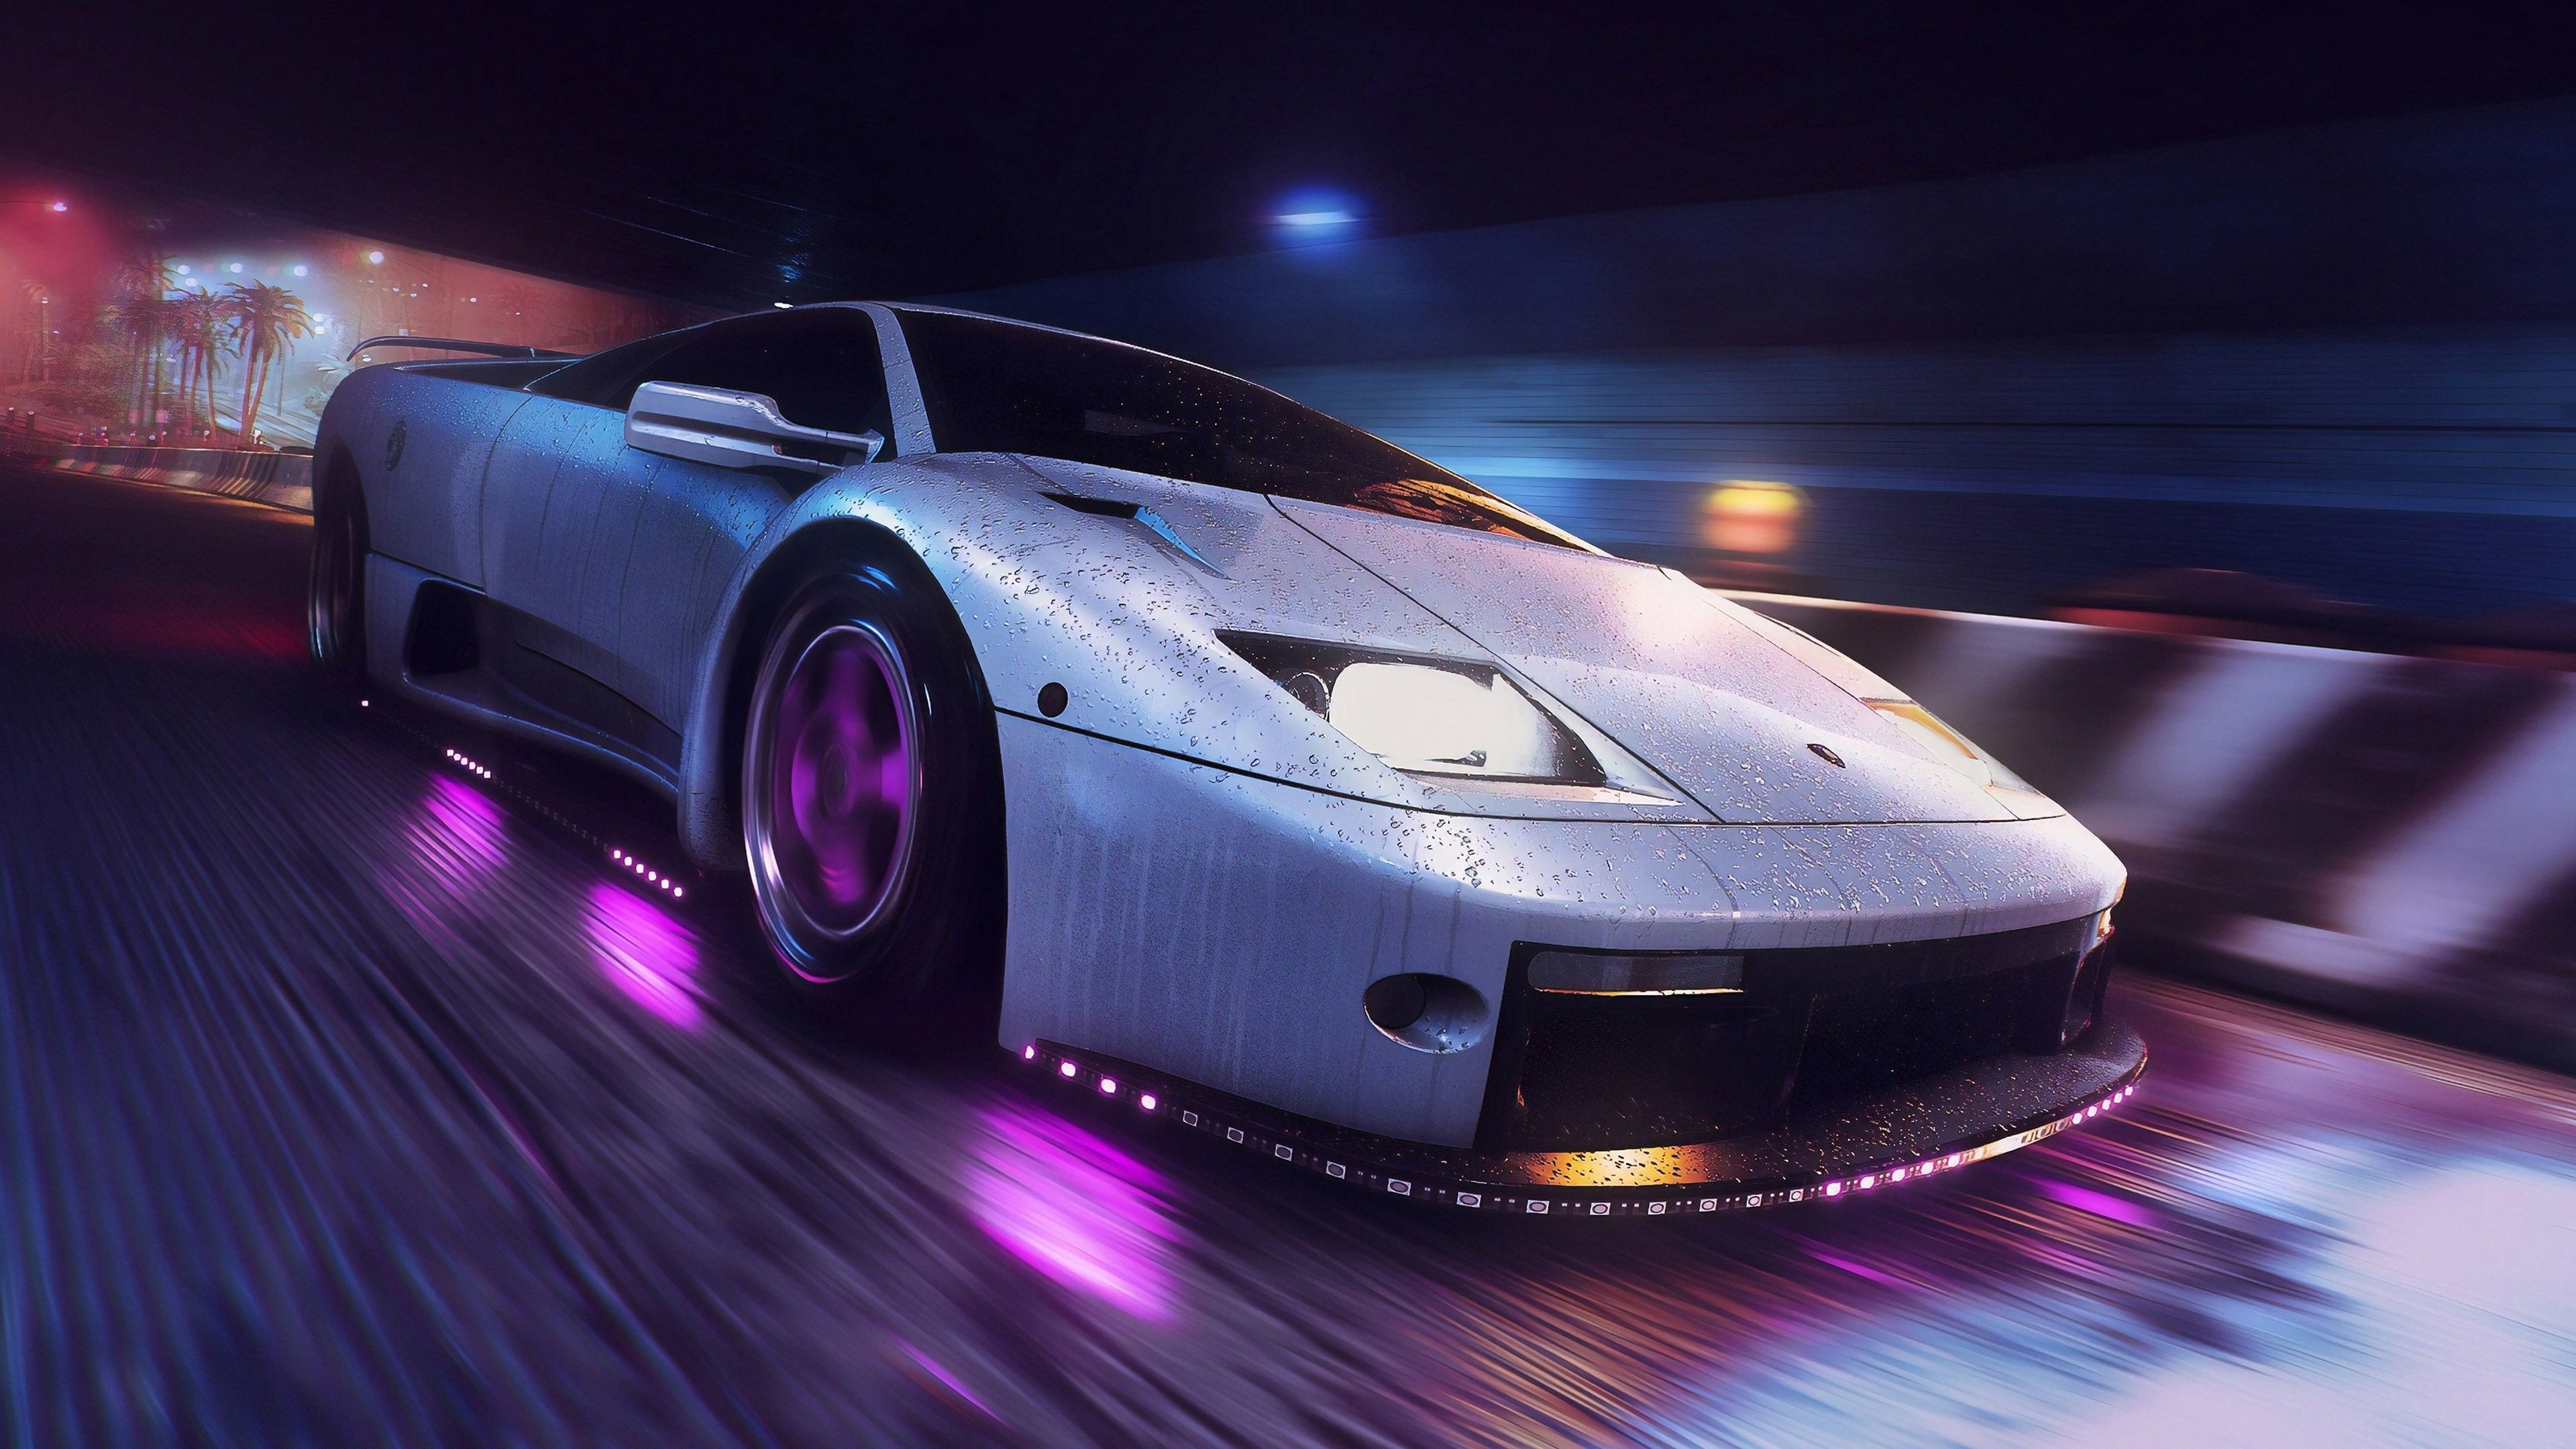 Free download Need For Speed Heat 720x1280 Wallpaper Ecopetitcat 720x1280  for your Desktop Mobile  Tablet  Explore 59 720x1280 Wallpapers   Samsung Galaxy S3 Wallpapers 720x1280 720x1280 HD Wallpapers for Mobile  720X1280 Wallpaper